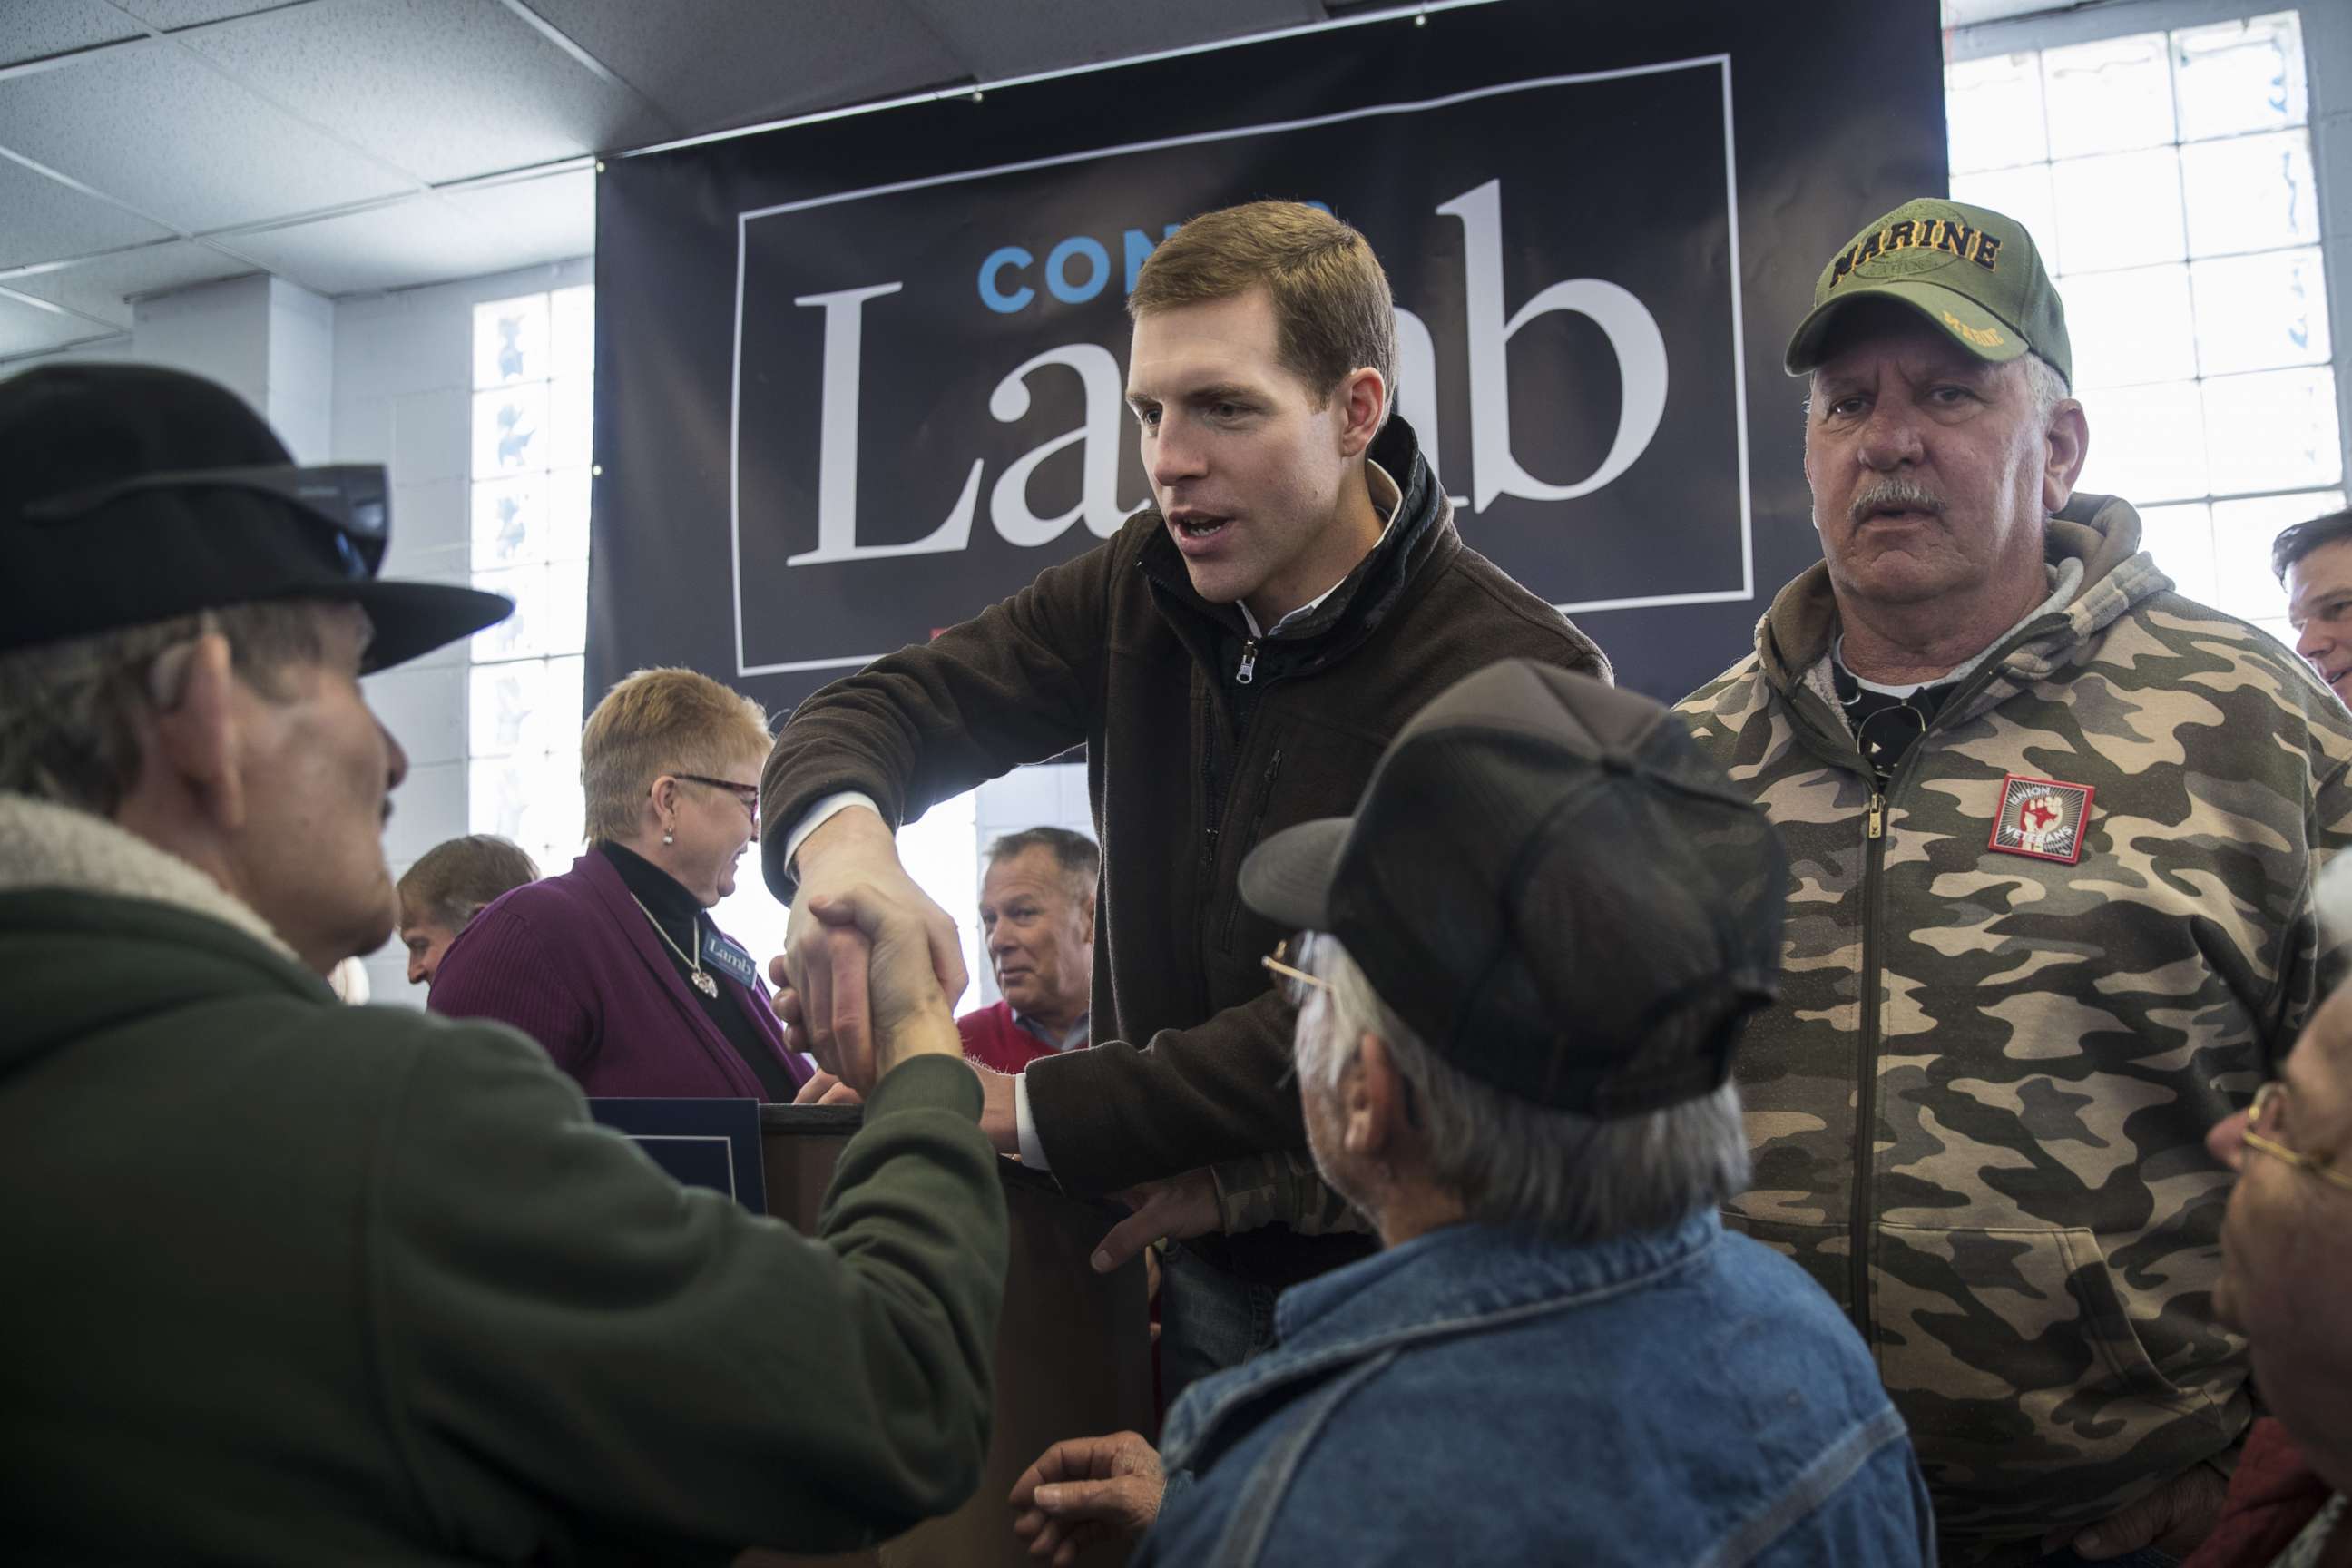 PHOTO: Conor Lamb, Democratic Congressional candidate for Pennsylvania's 18th district, greets supporters after speaking at a campaign rally with United Mine Workers of America (UMWA) at the Greene County Fairgrounds, March 11, 2018, in Waynesburg, Penn.